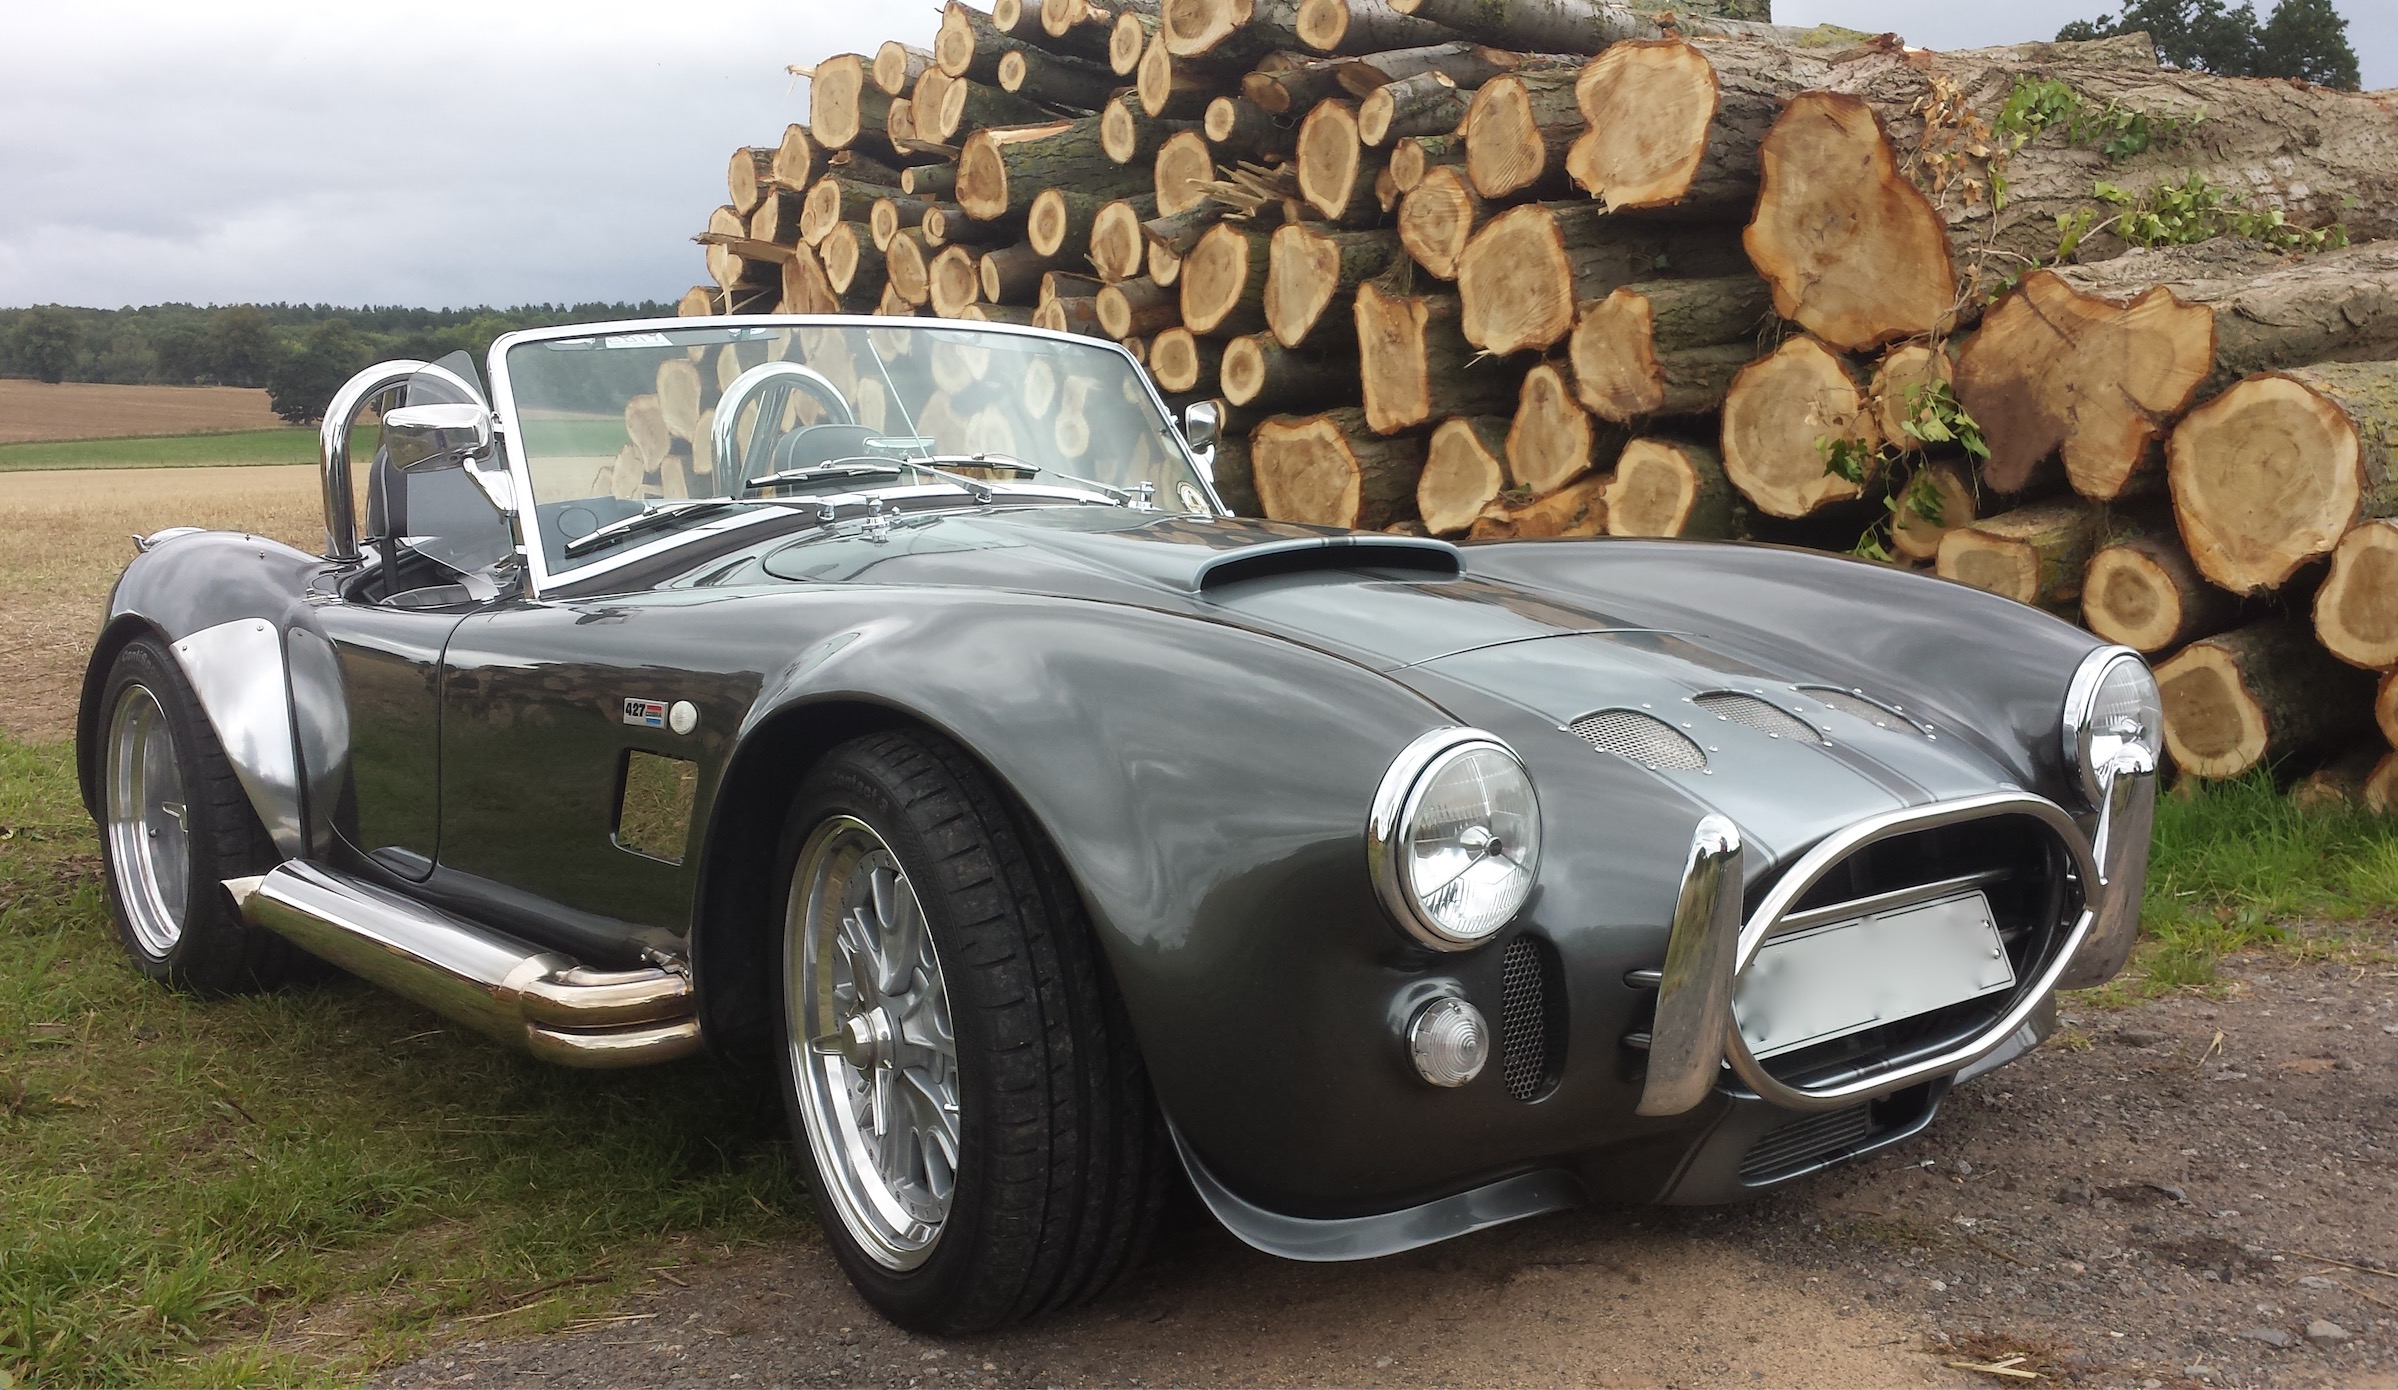 Cobra replica parked in front of logs